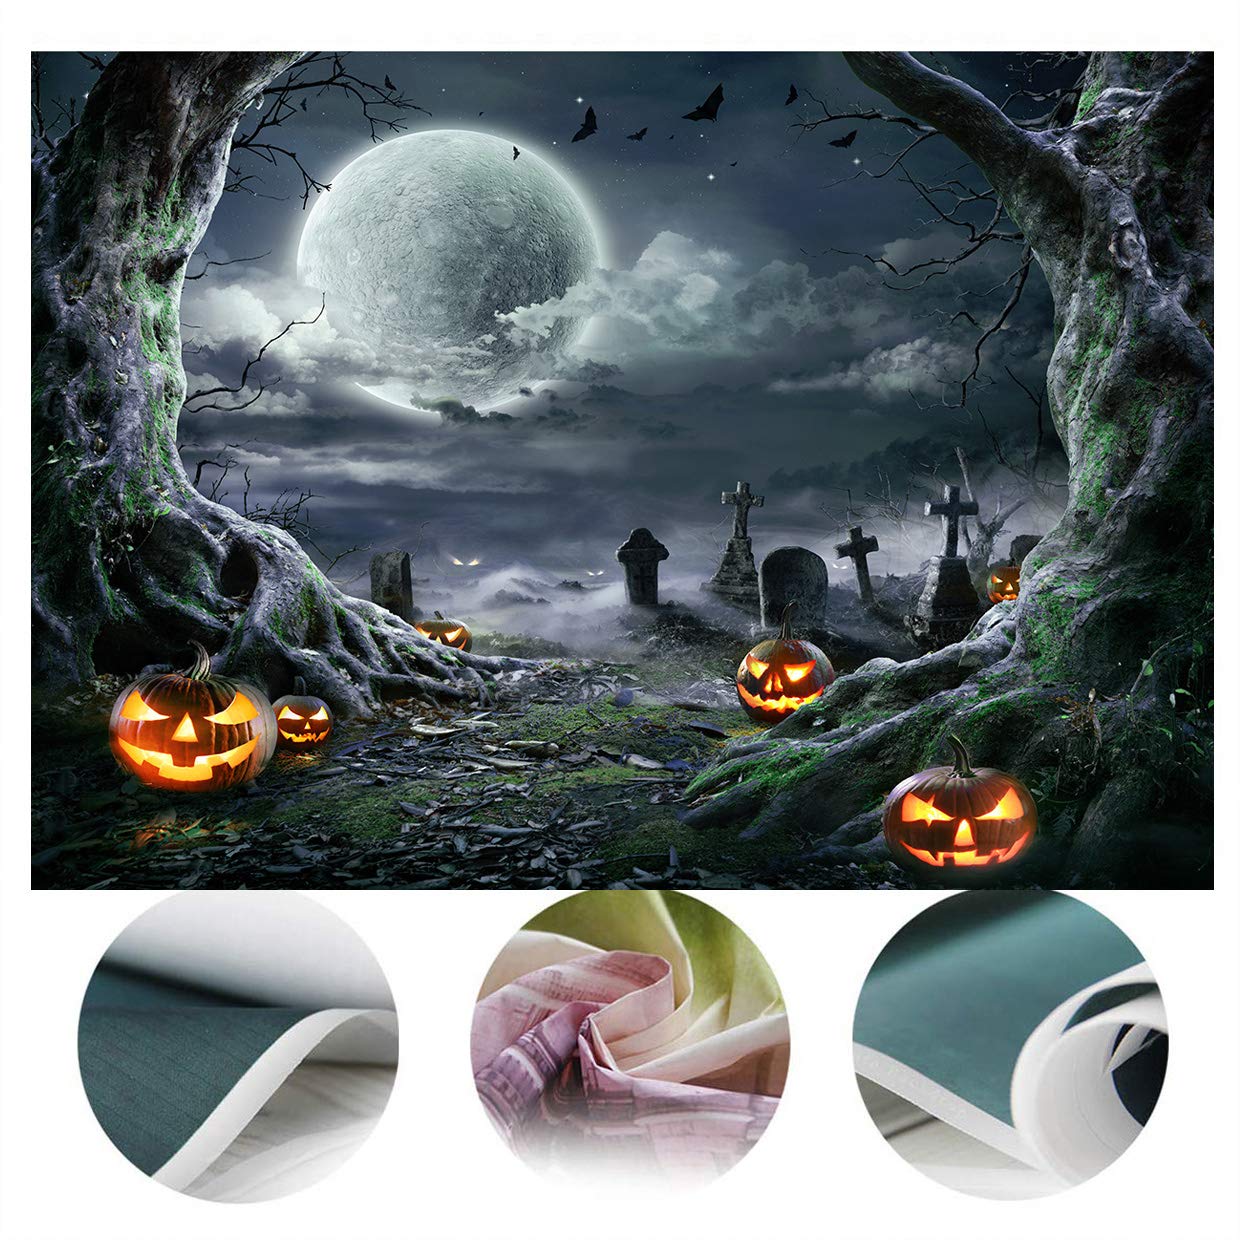 SJOLOON Halloween Backdrop for Photography Horror Night Background Scary Pumpkin Moon Backdrop for Party Decoration Supplies Studio Props 11897 (8x6FT)